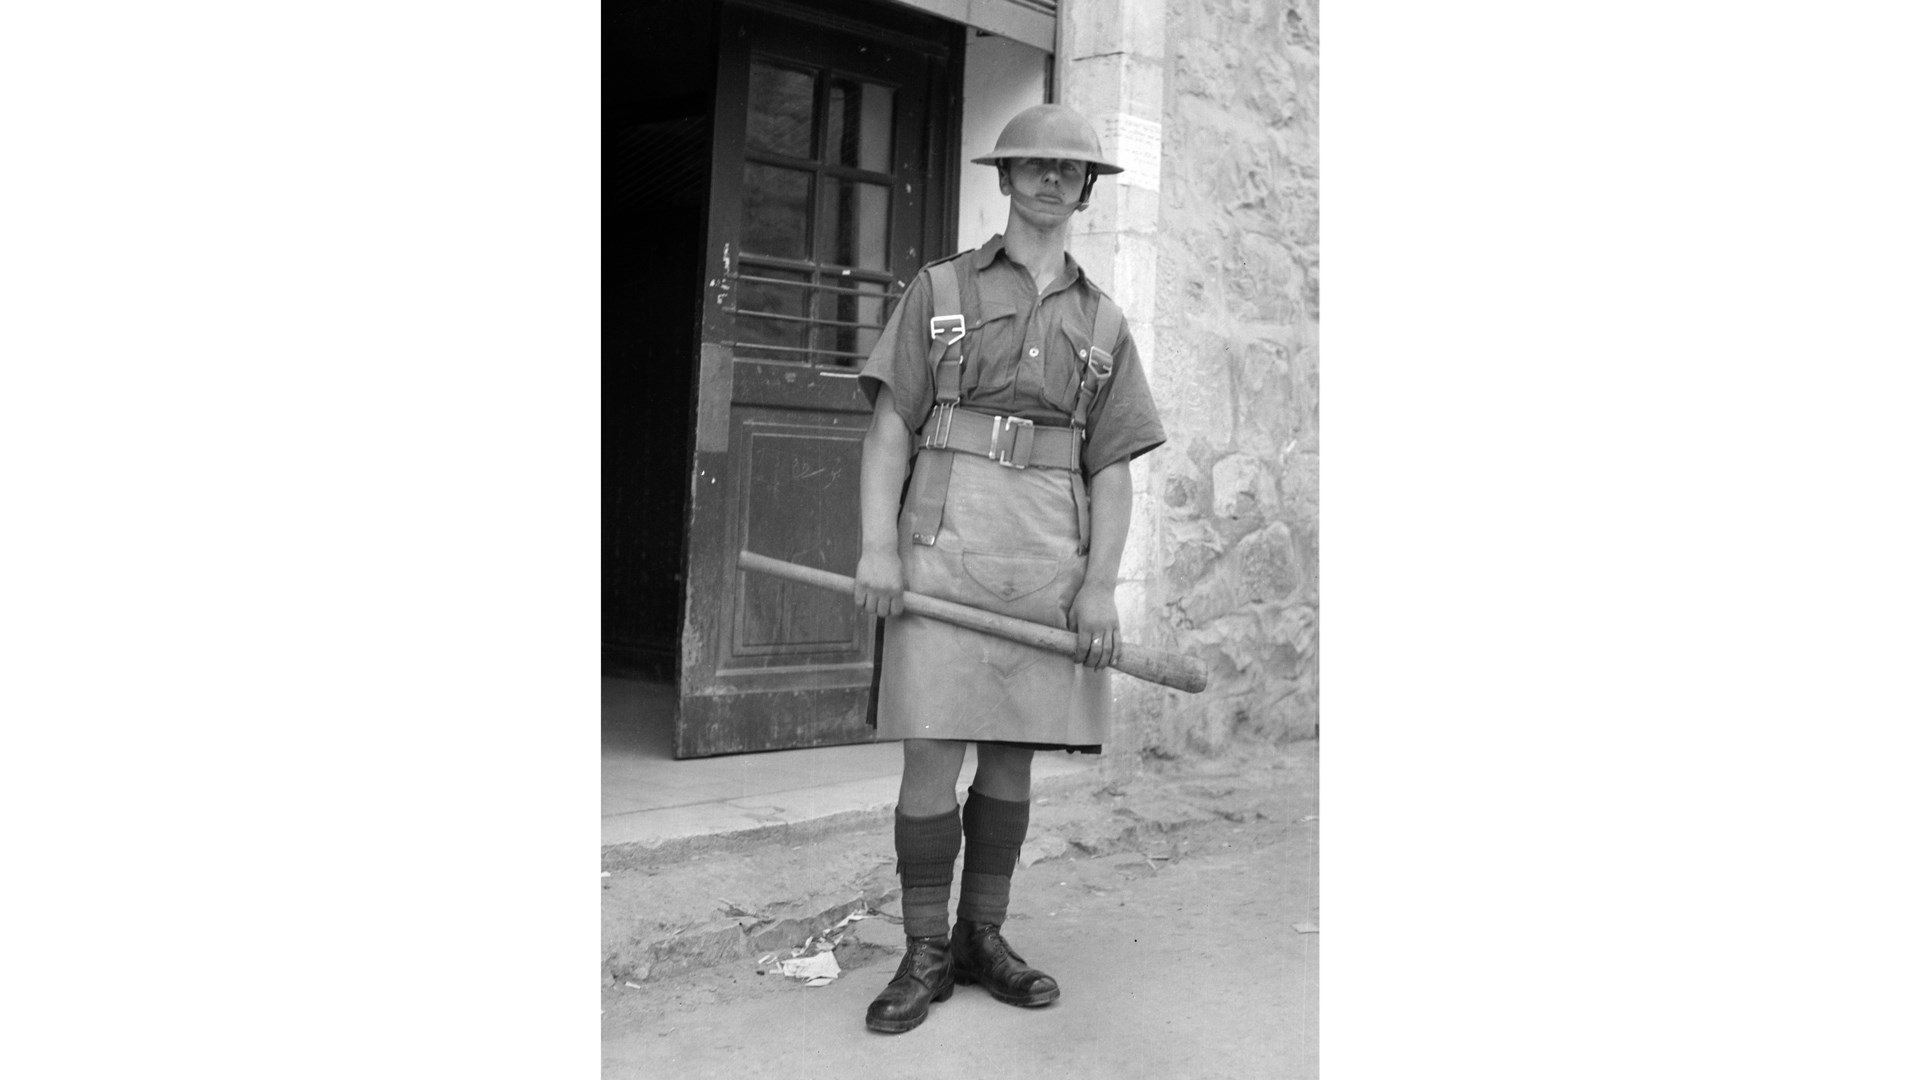 Less lethal:  A British soldier prepared for riot control with a sturdy axe-handle.  Library of Congress